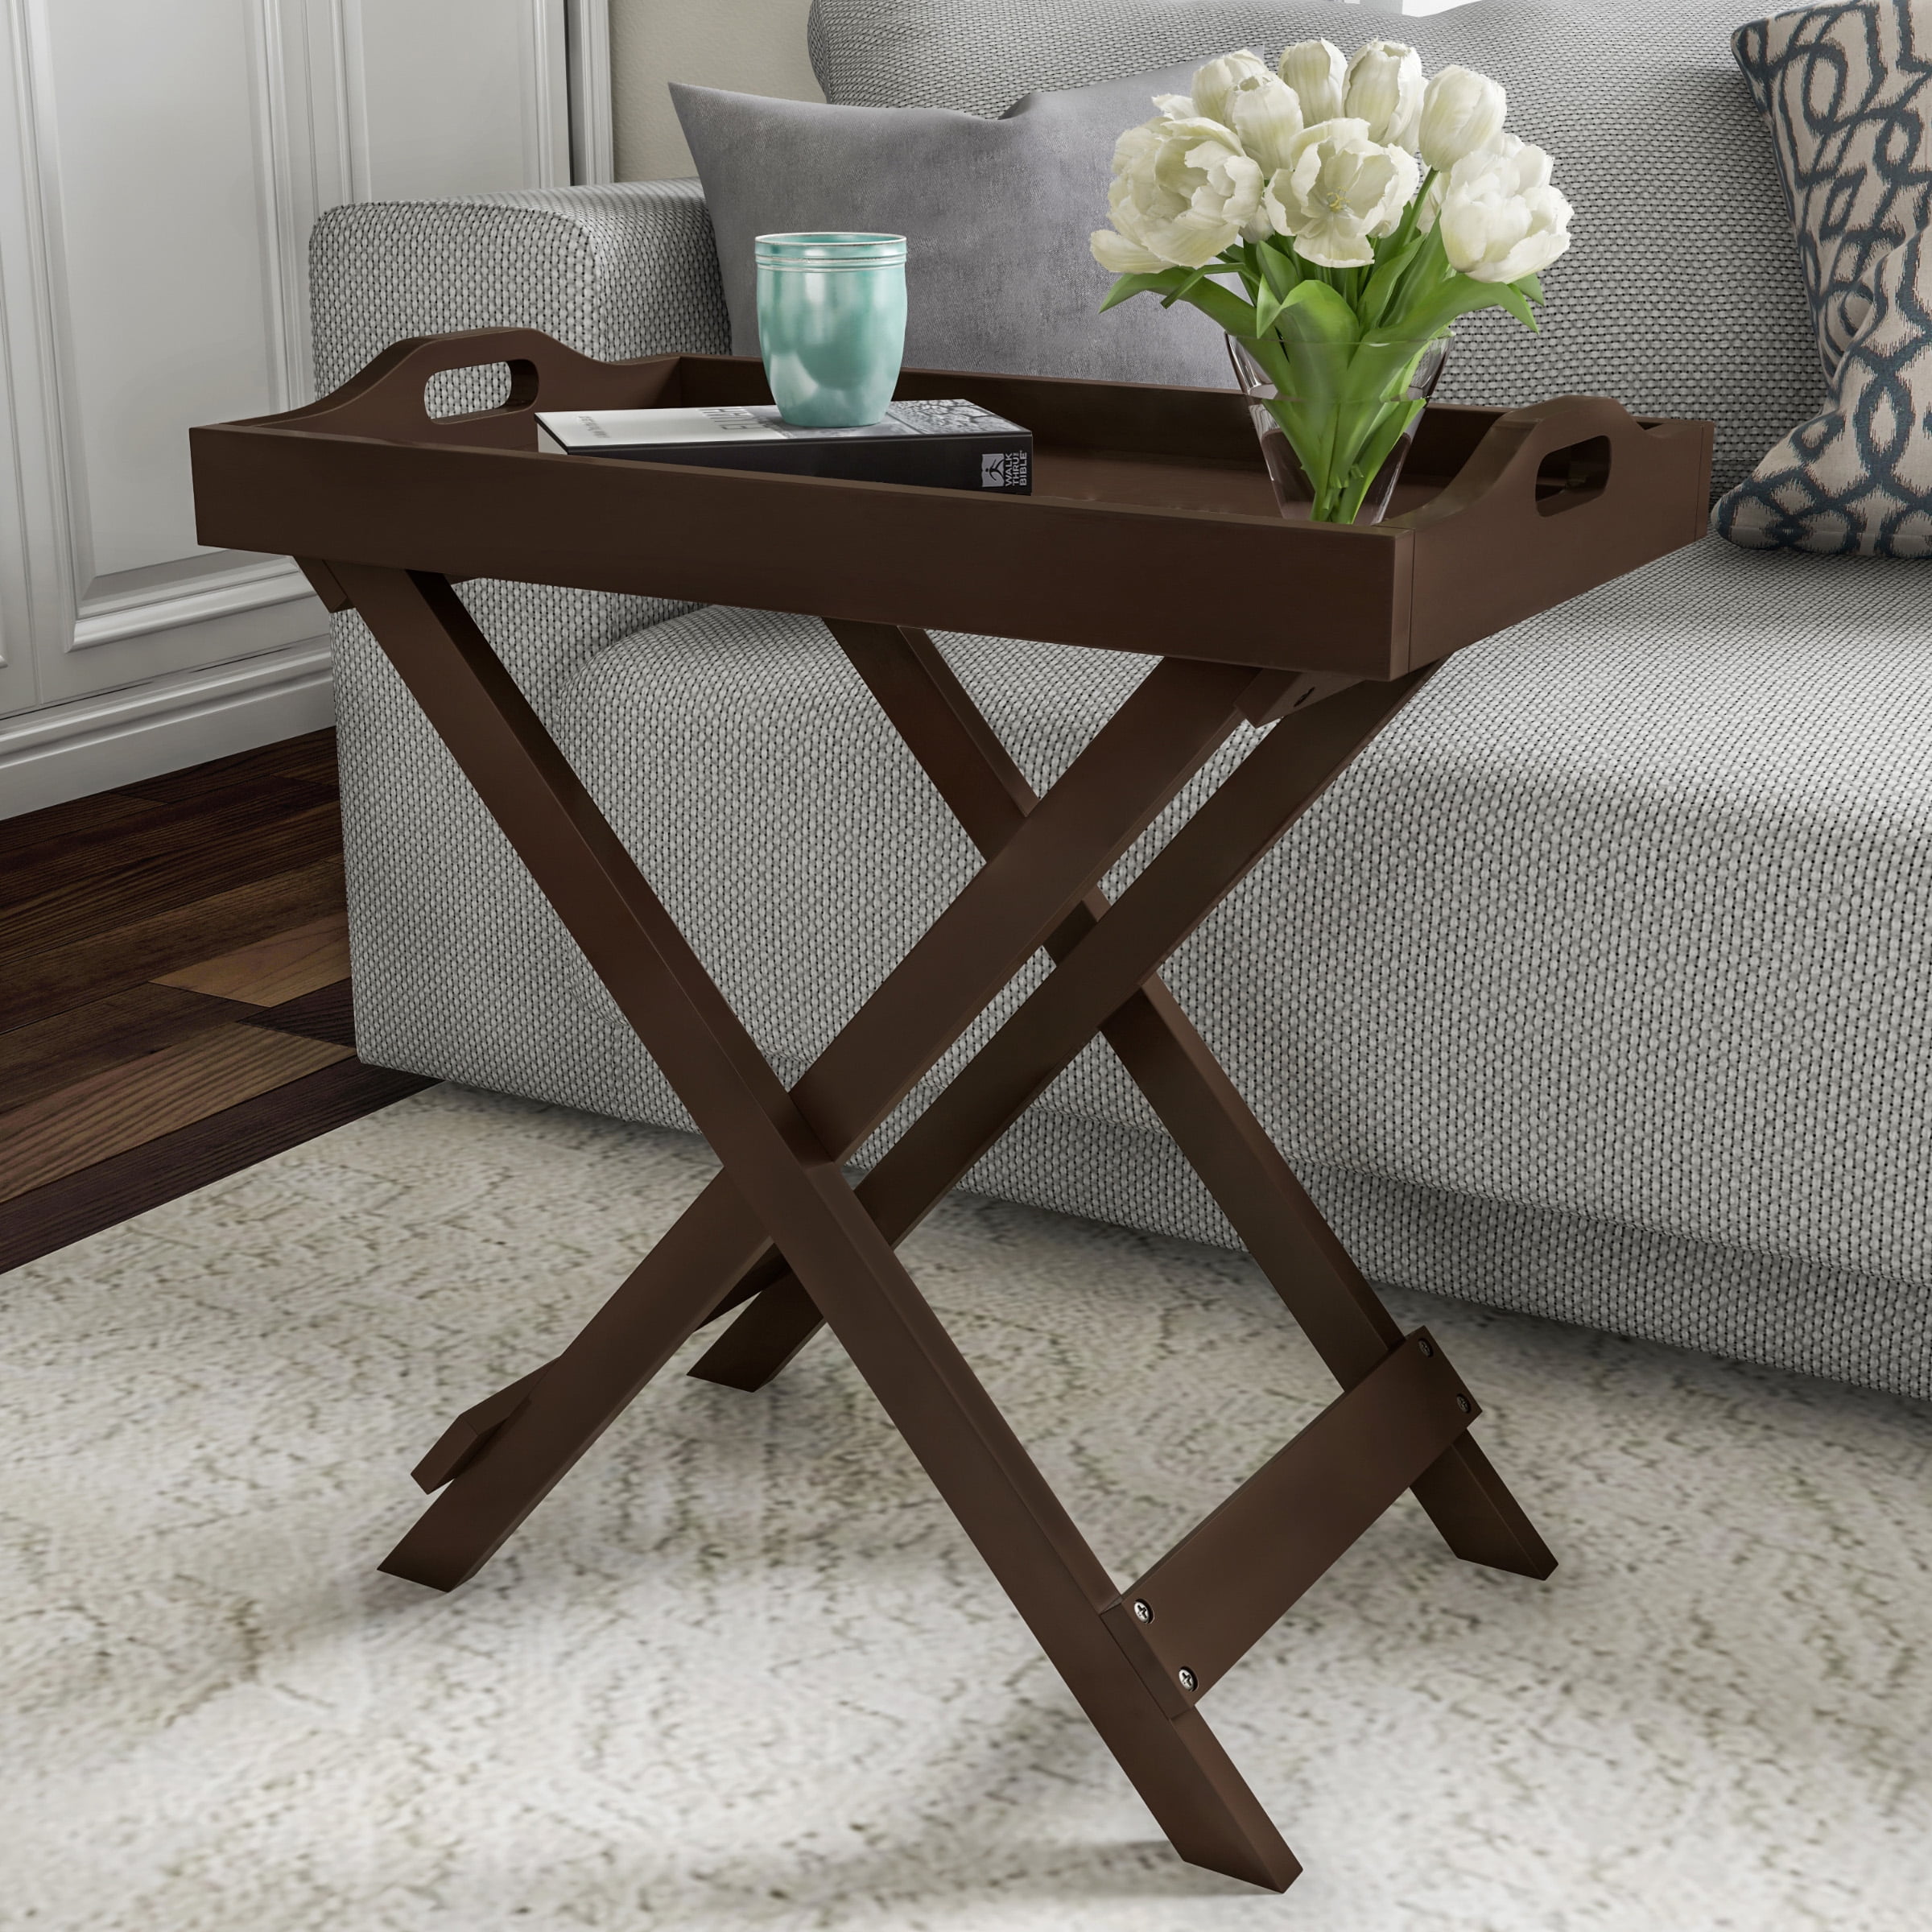 Side table Simone Folding Table Wood Tray Removable Tray Table 